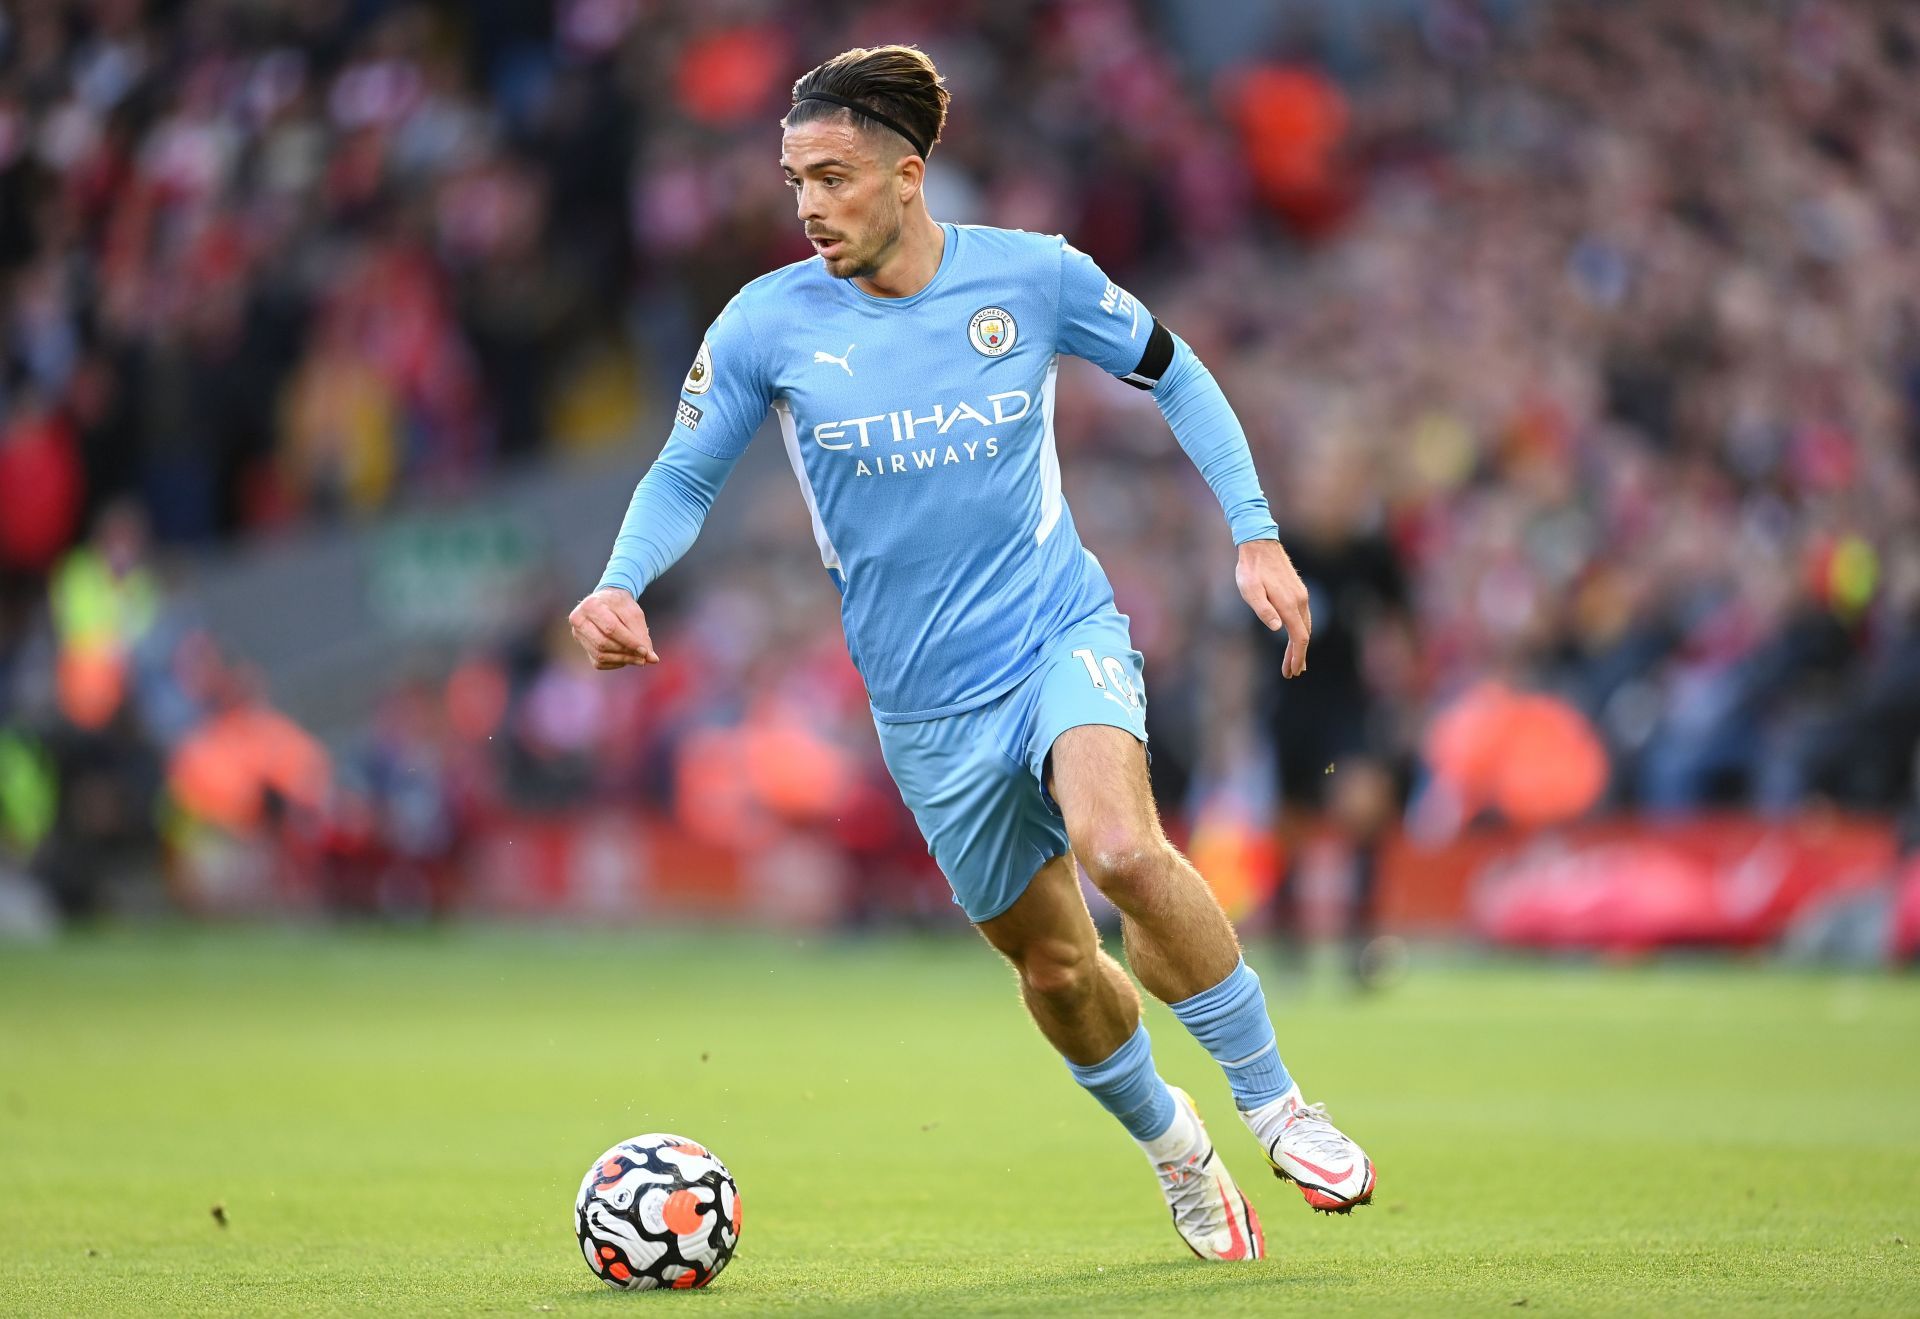 Jack Grealish arrived at Manchester City this summer.